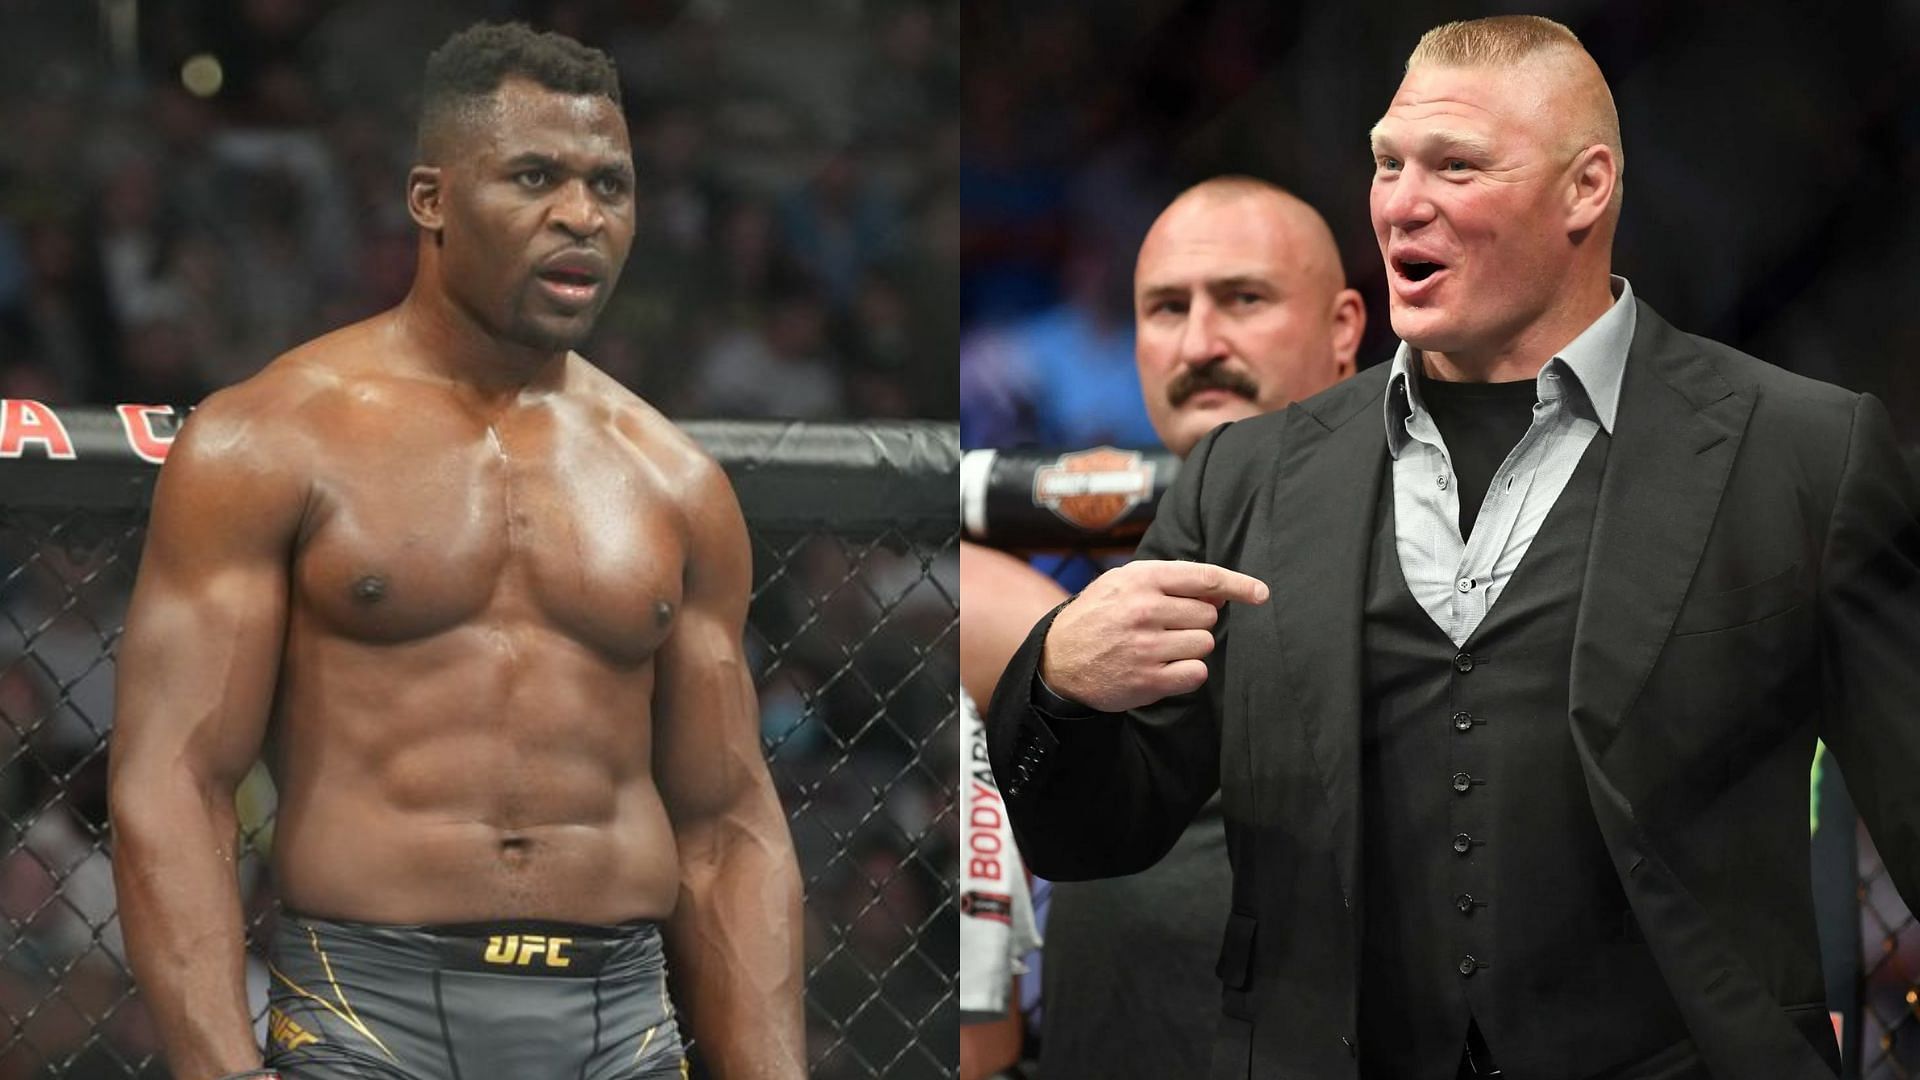 Francis Ngannou released: Former UFC Heavyweight Champion denies contract with Brock Lesnar money